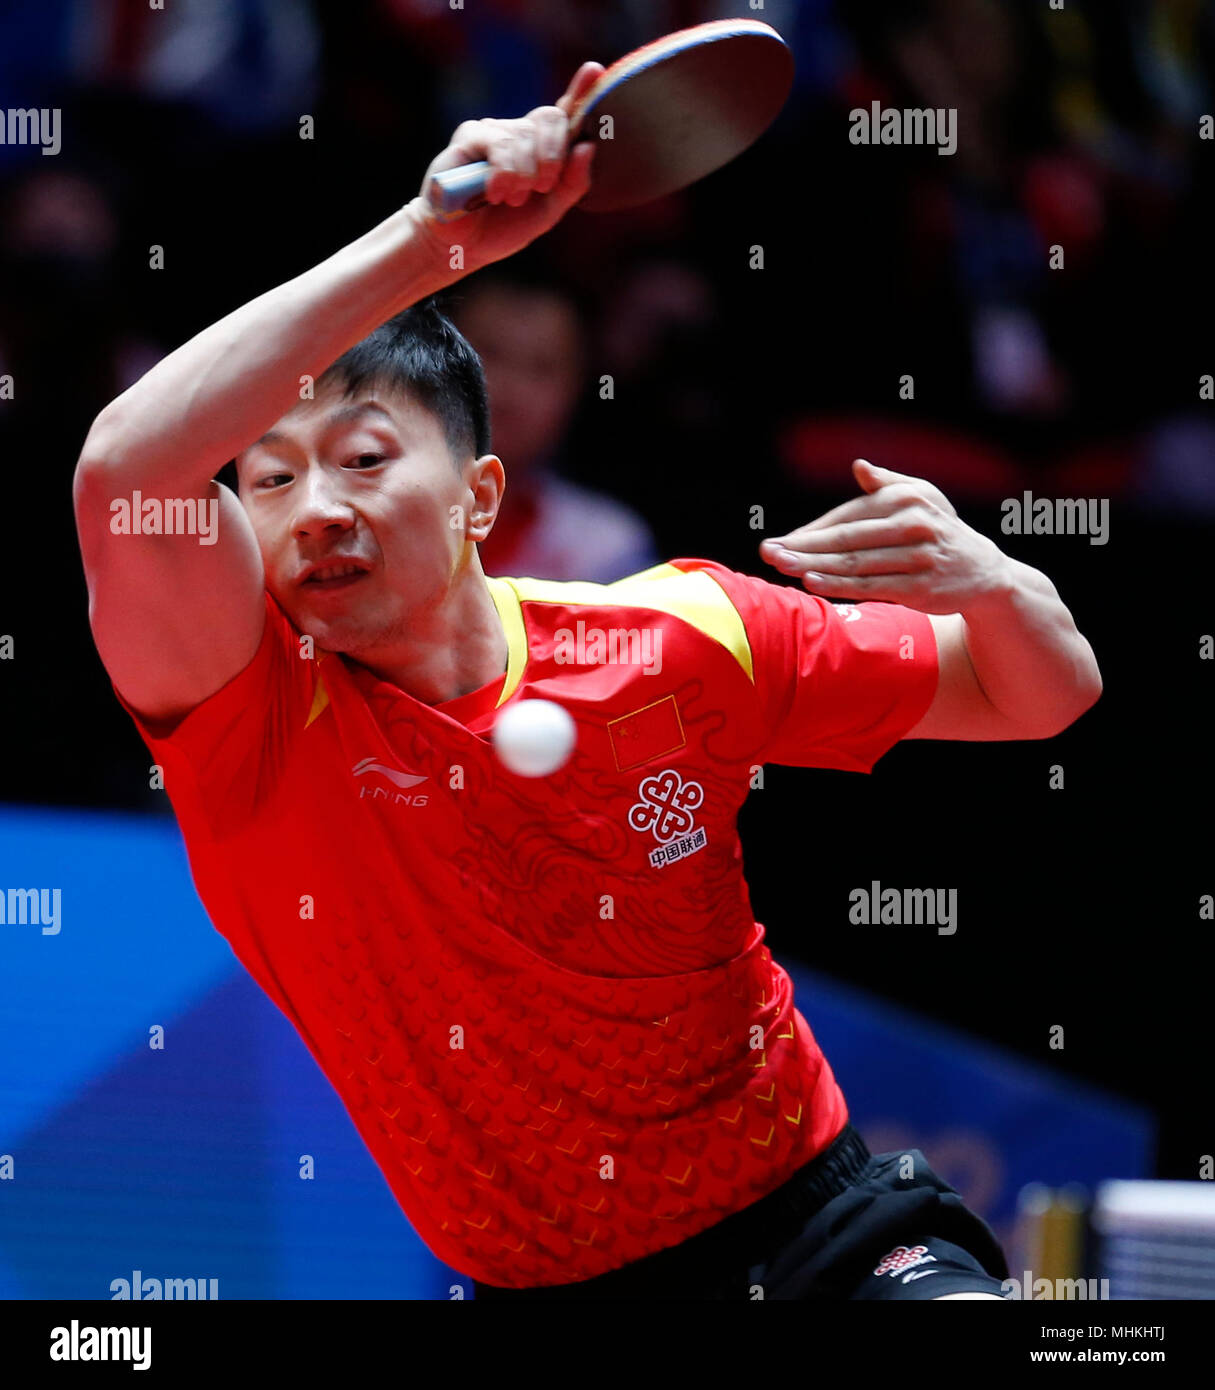 Halmstad, Sweden. 2nd May, 2018. Ma Long of China returns to Choe Il of Democratic People's Republic of Korea (DPRK) at the fifth round of Men's group match during the 2018 World Team Table Tennis Championships in Halmstad, Sweden, May 2, 2018. Ma won the game with 3-0, and team China won the match with 3-0. Credit: Ye Pingfan/Xinhua/Alamy Live News Stock Photo